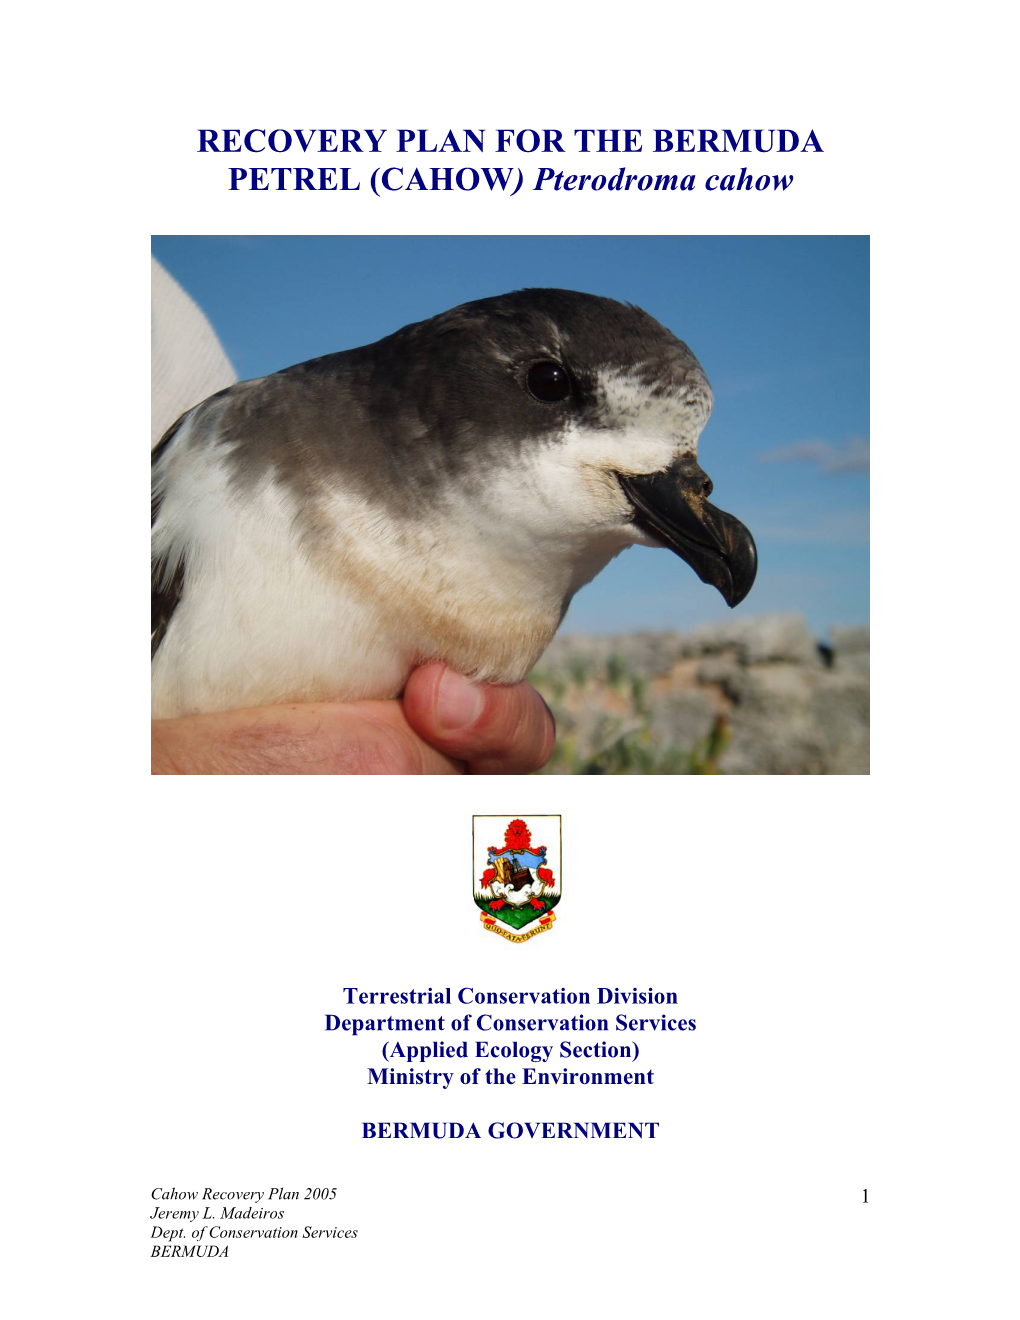 RECOVERY PLAN for the BERMUDA PETREL (CAHOW) Pterodroma Cahow